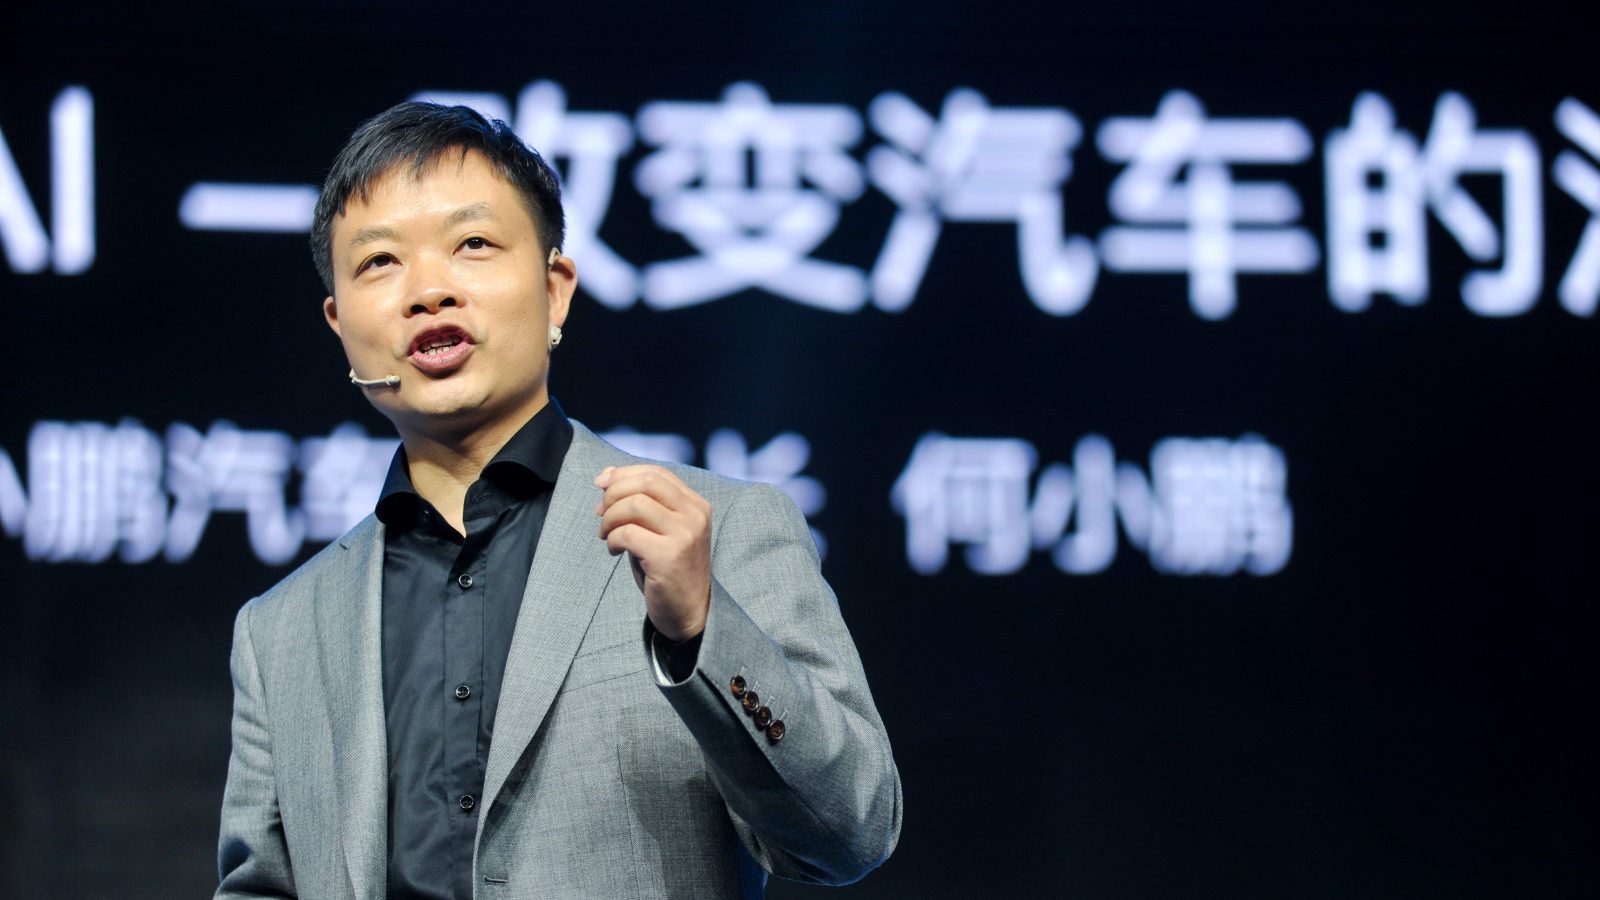 He Xiaopeng, Chairman of XPENG Motors, speaks during the Global Mobile Internet Conference (GMIC) 2018 at China National Convention Center on April 26, 2018 in Beijing, China.